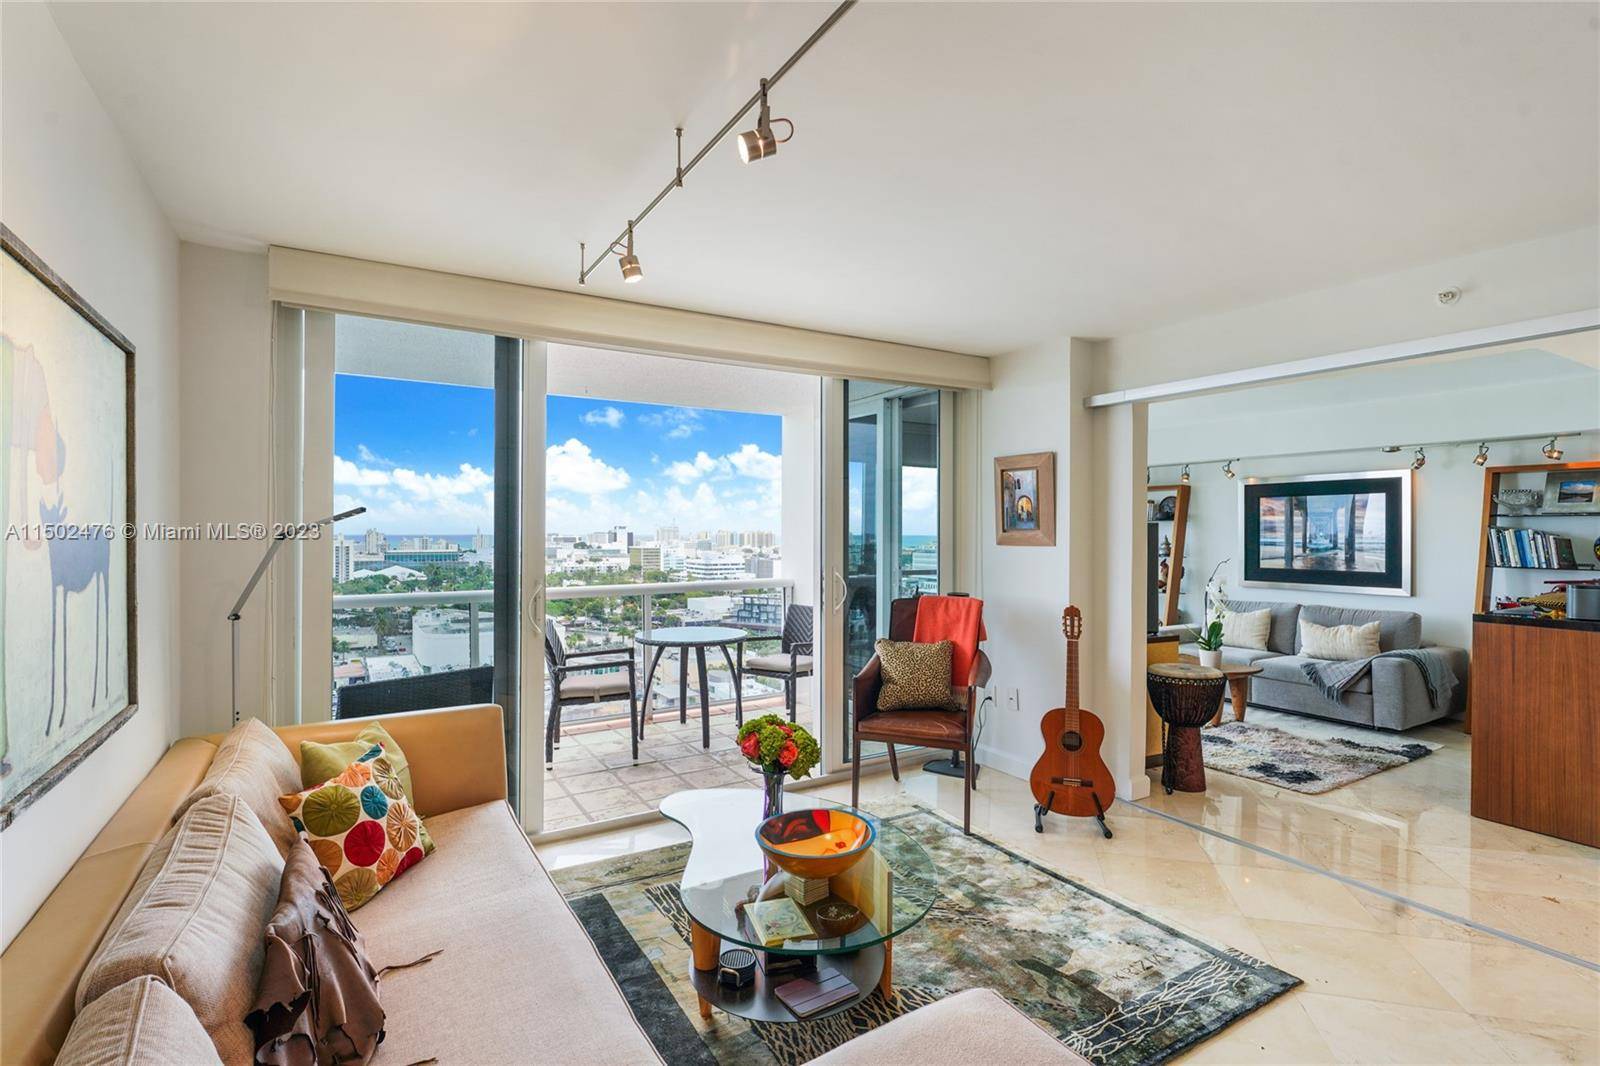 Luxurious 2 bed, 2 bath condo, with panoramic city and Miami Beach views in coveted Sunset Harbour South.